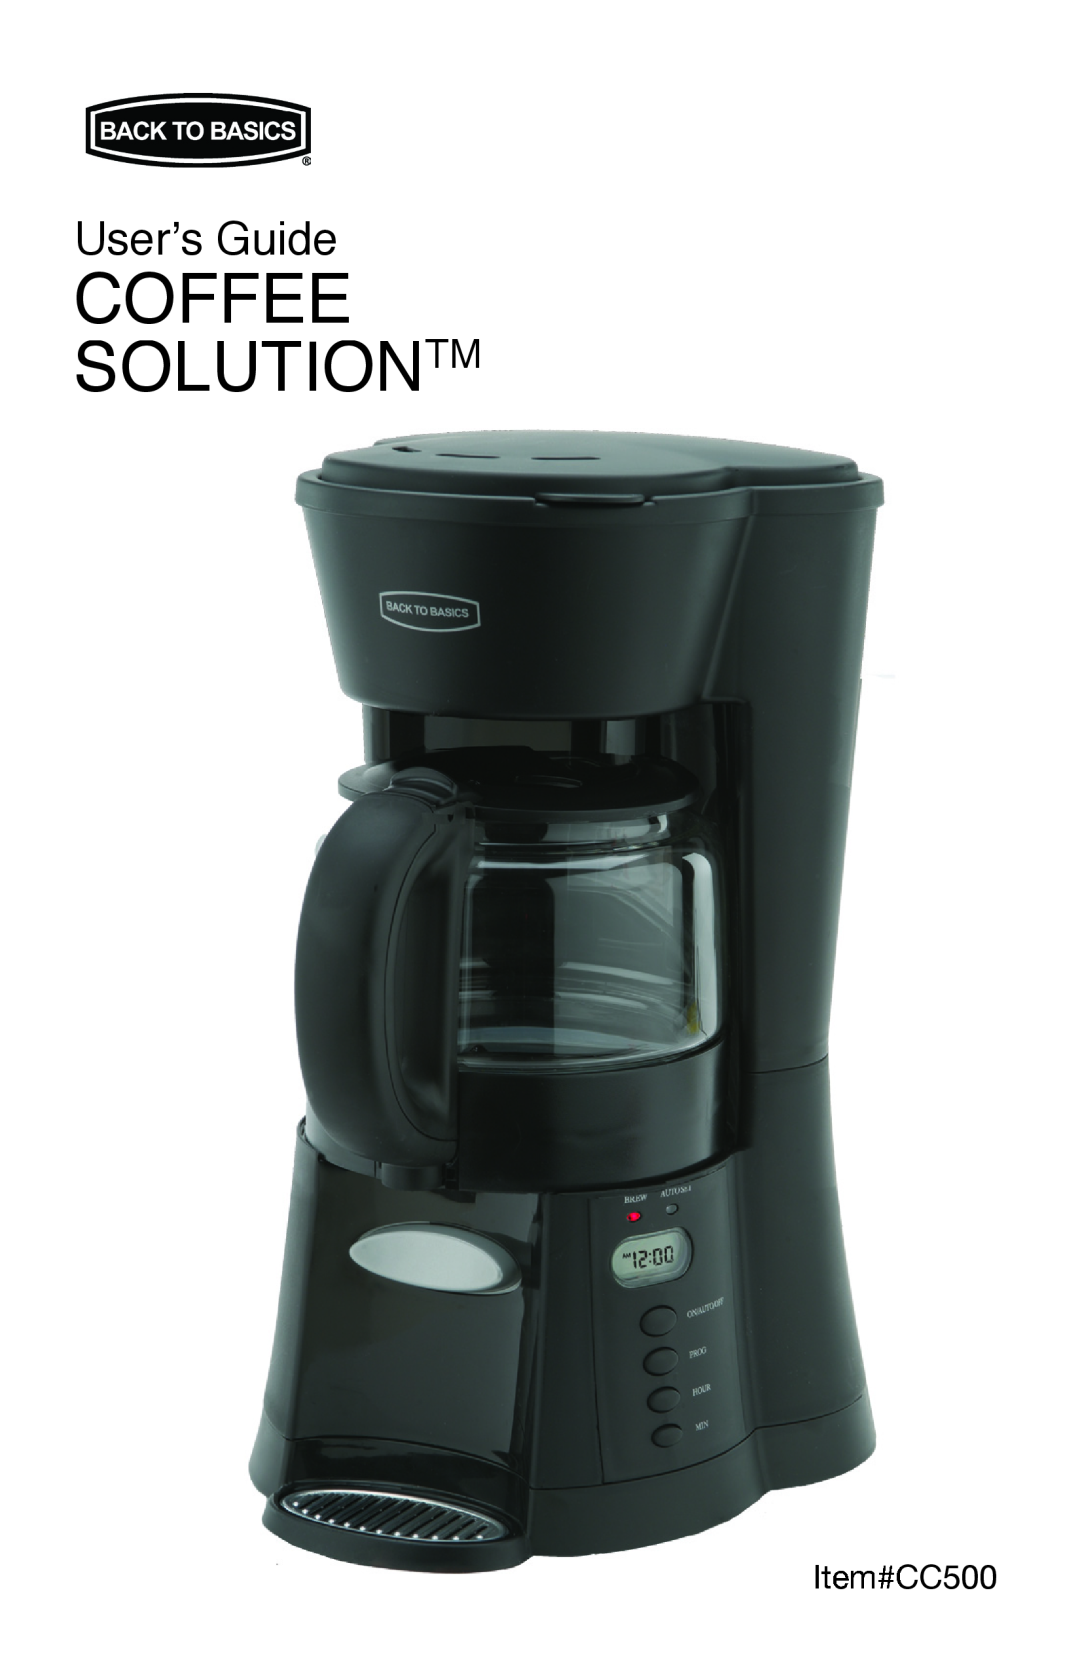 West Bend Back to Basics CC500 manual Coffee Solutiontm, User’s Guide 